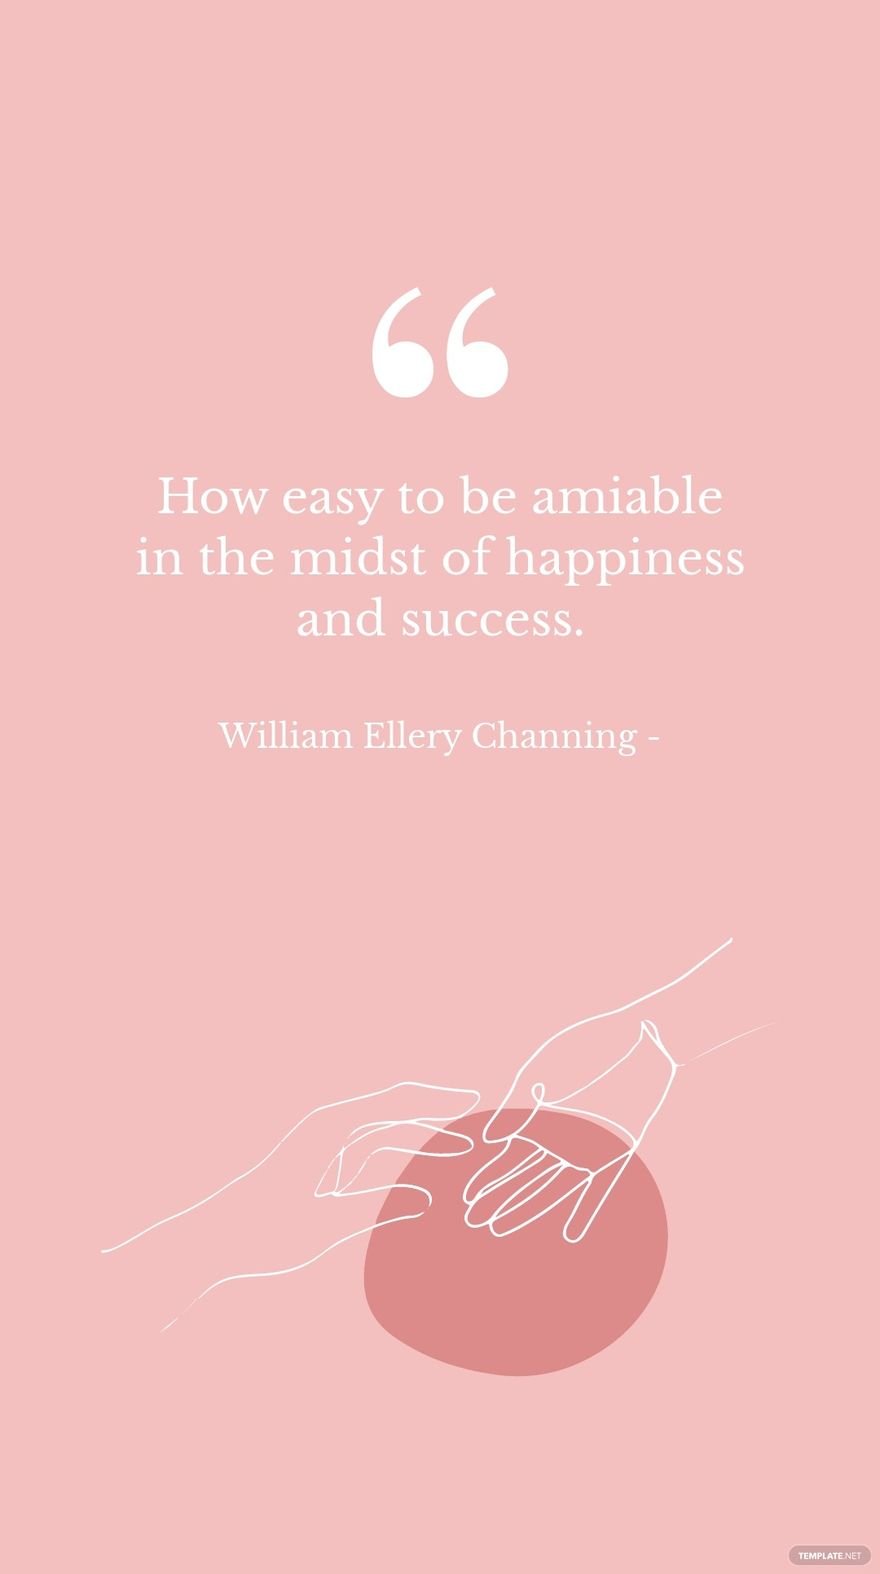 Free William Ellery Channing - How easy to be amiable in the midst of happiness and success.